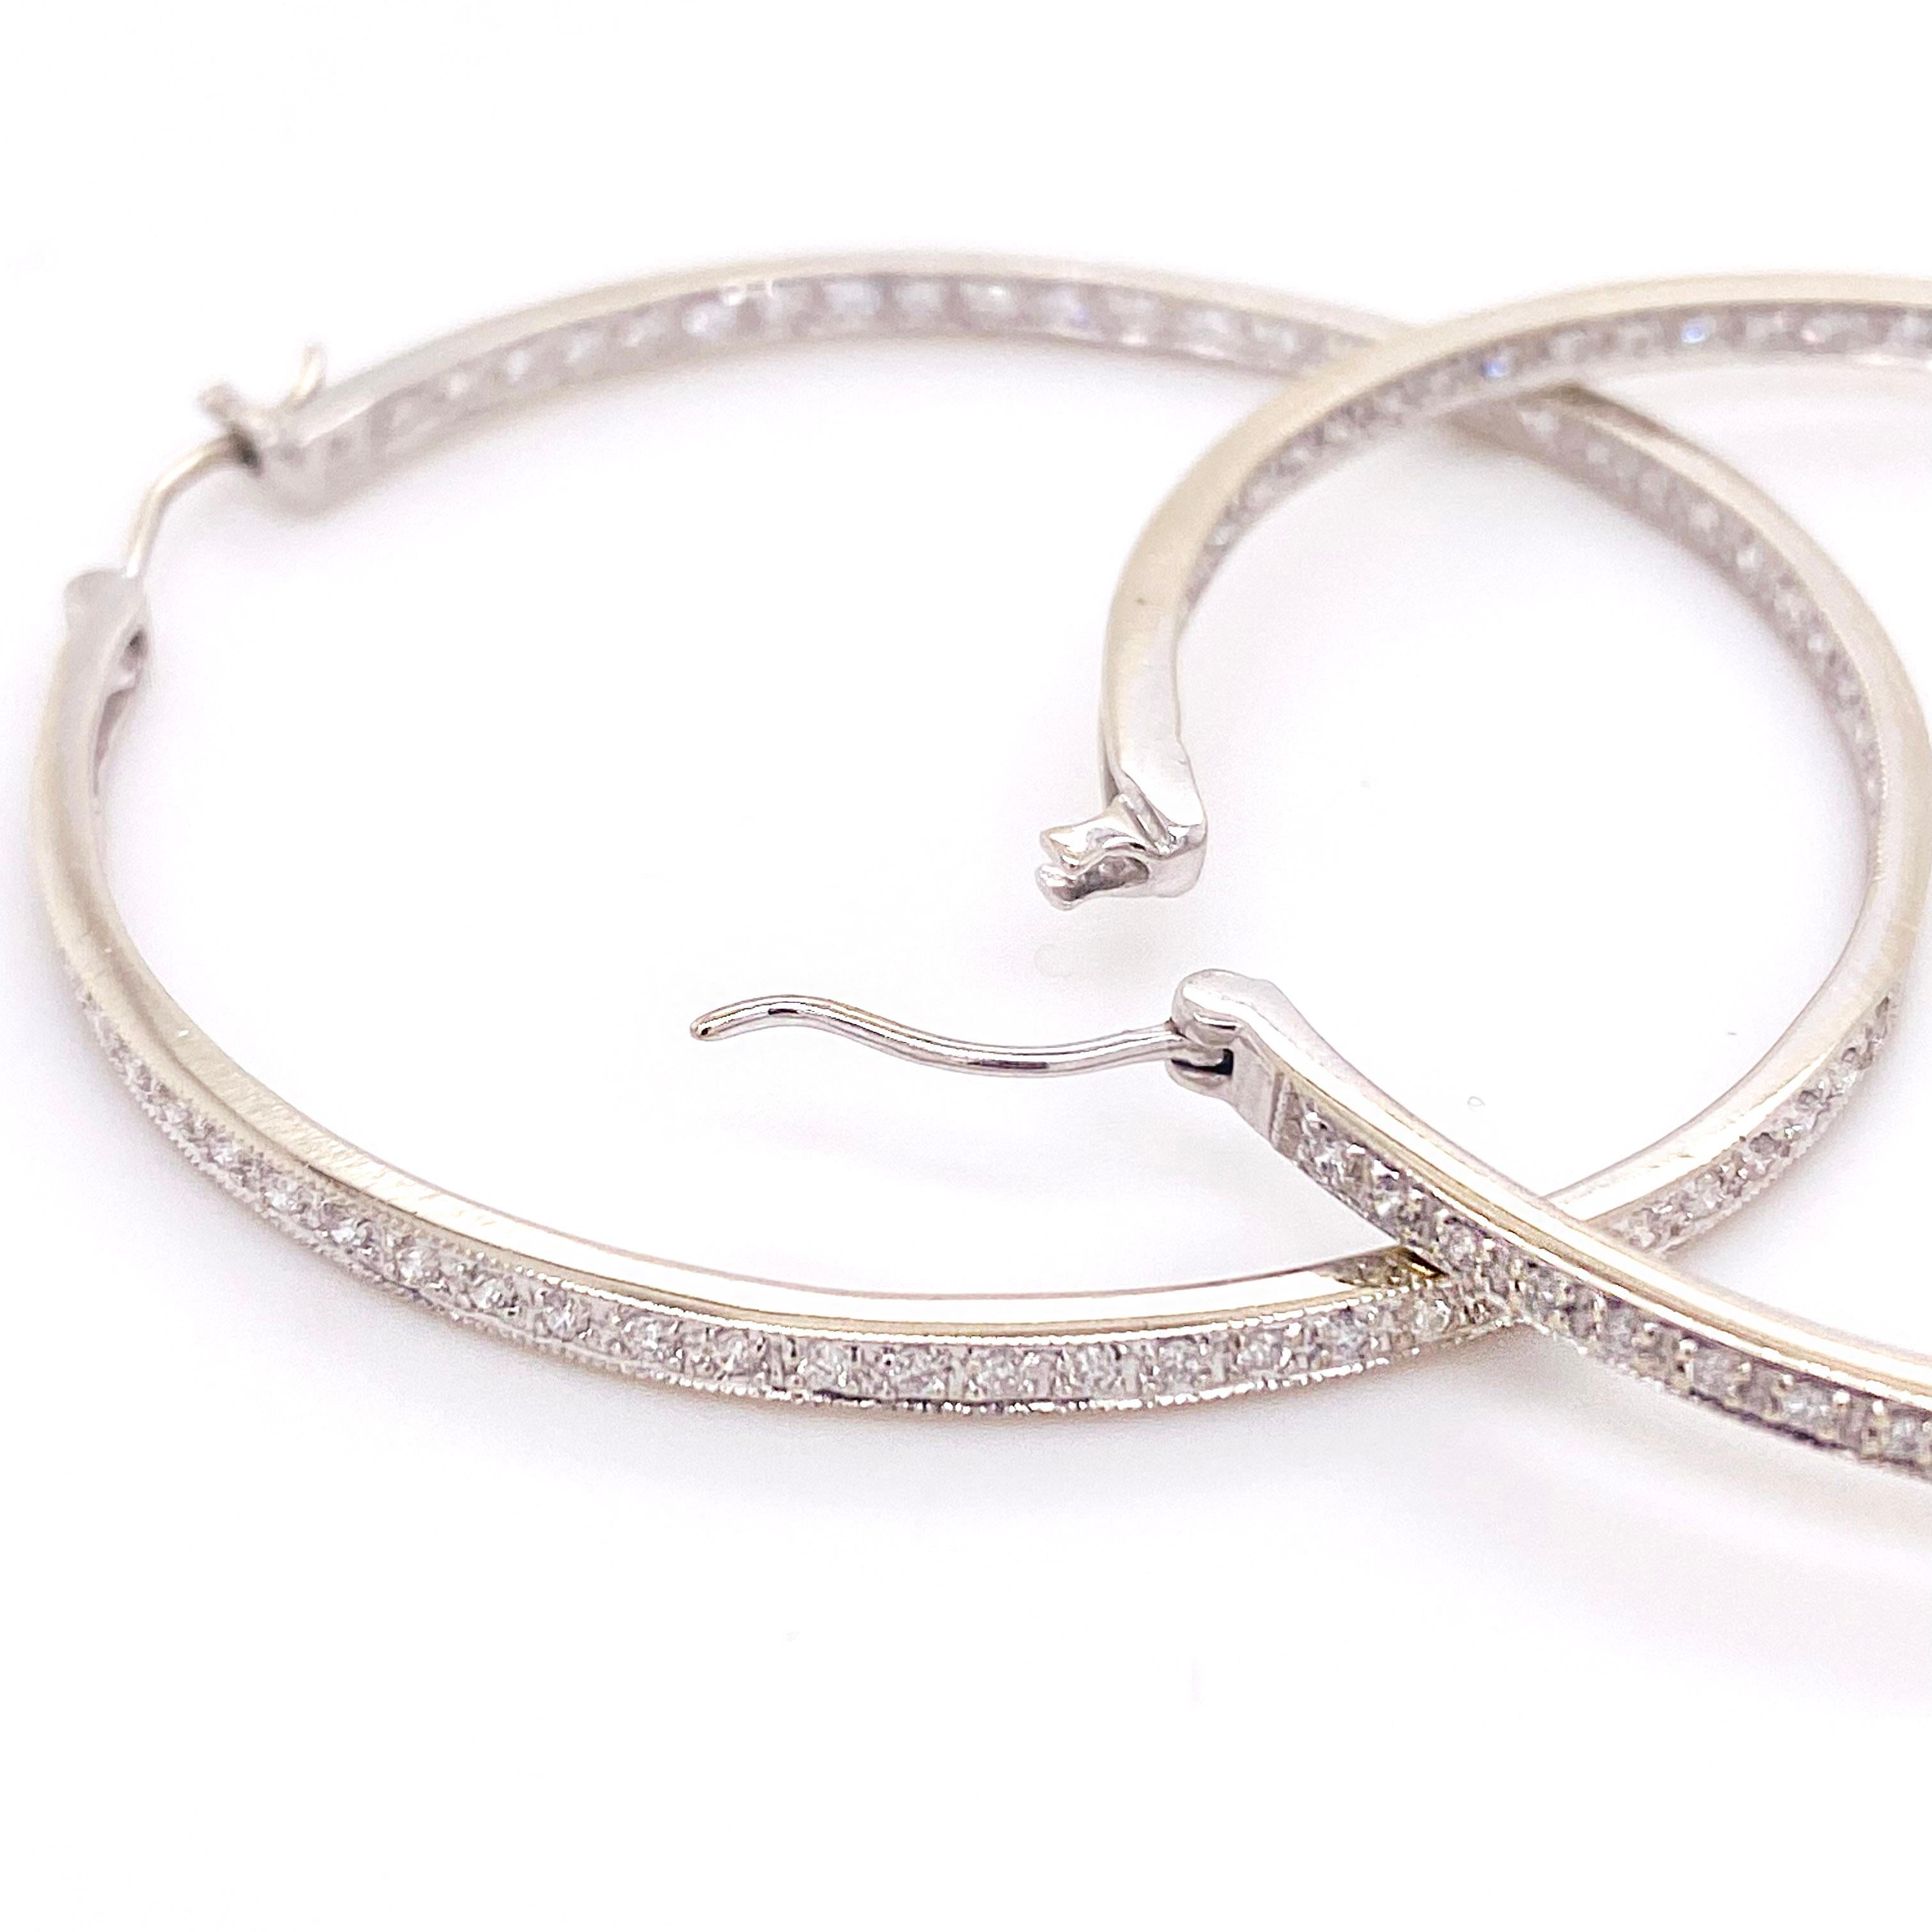 Round Cut Diamond Hoop Earrings, White Gold, Inside Out Hoops For Sale